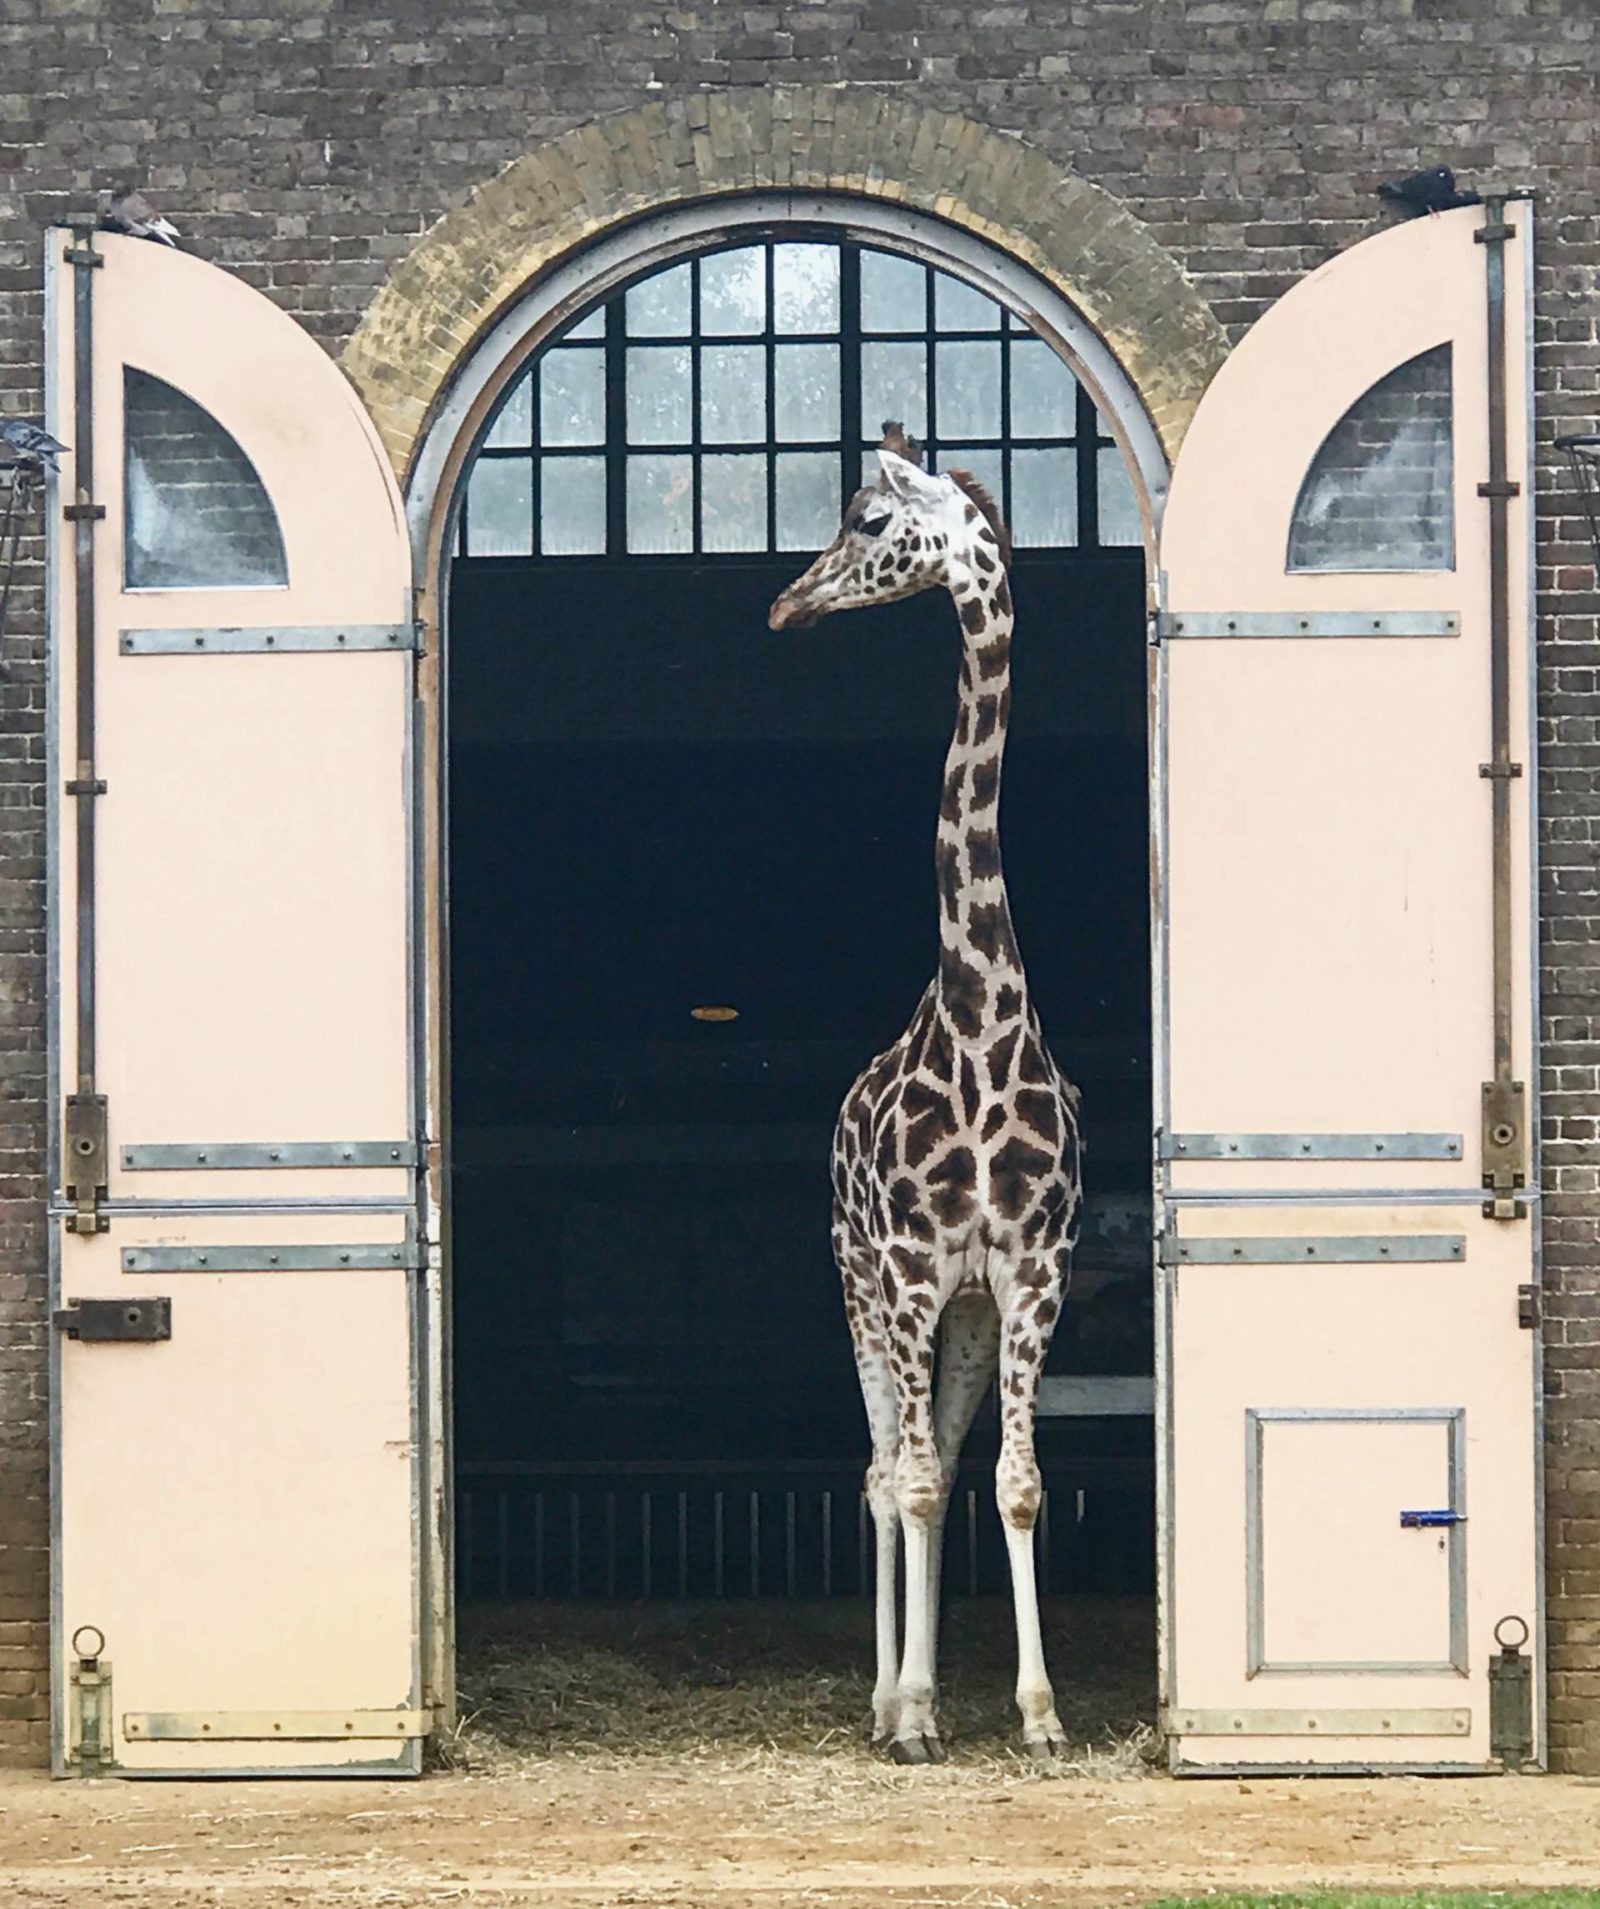 AttractionTix-for-London-Zoo